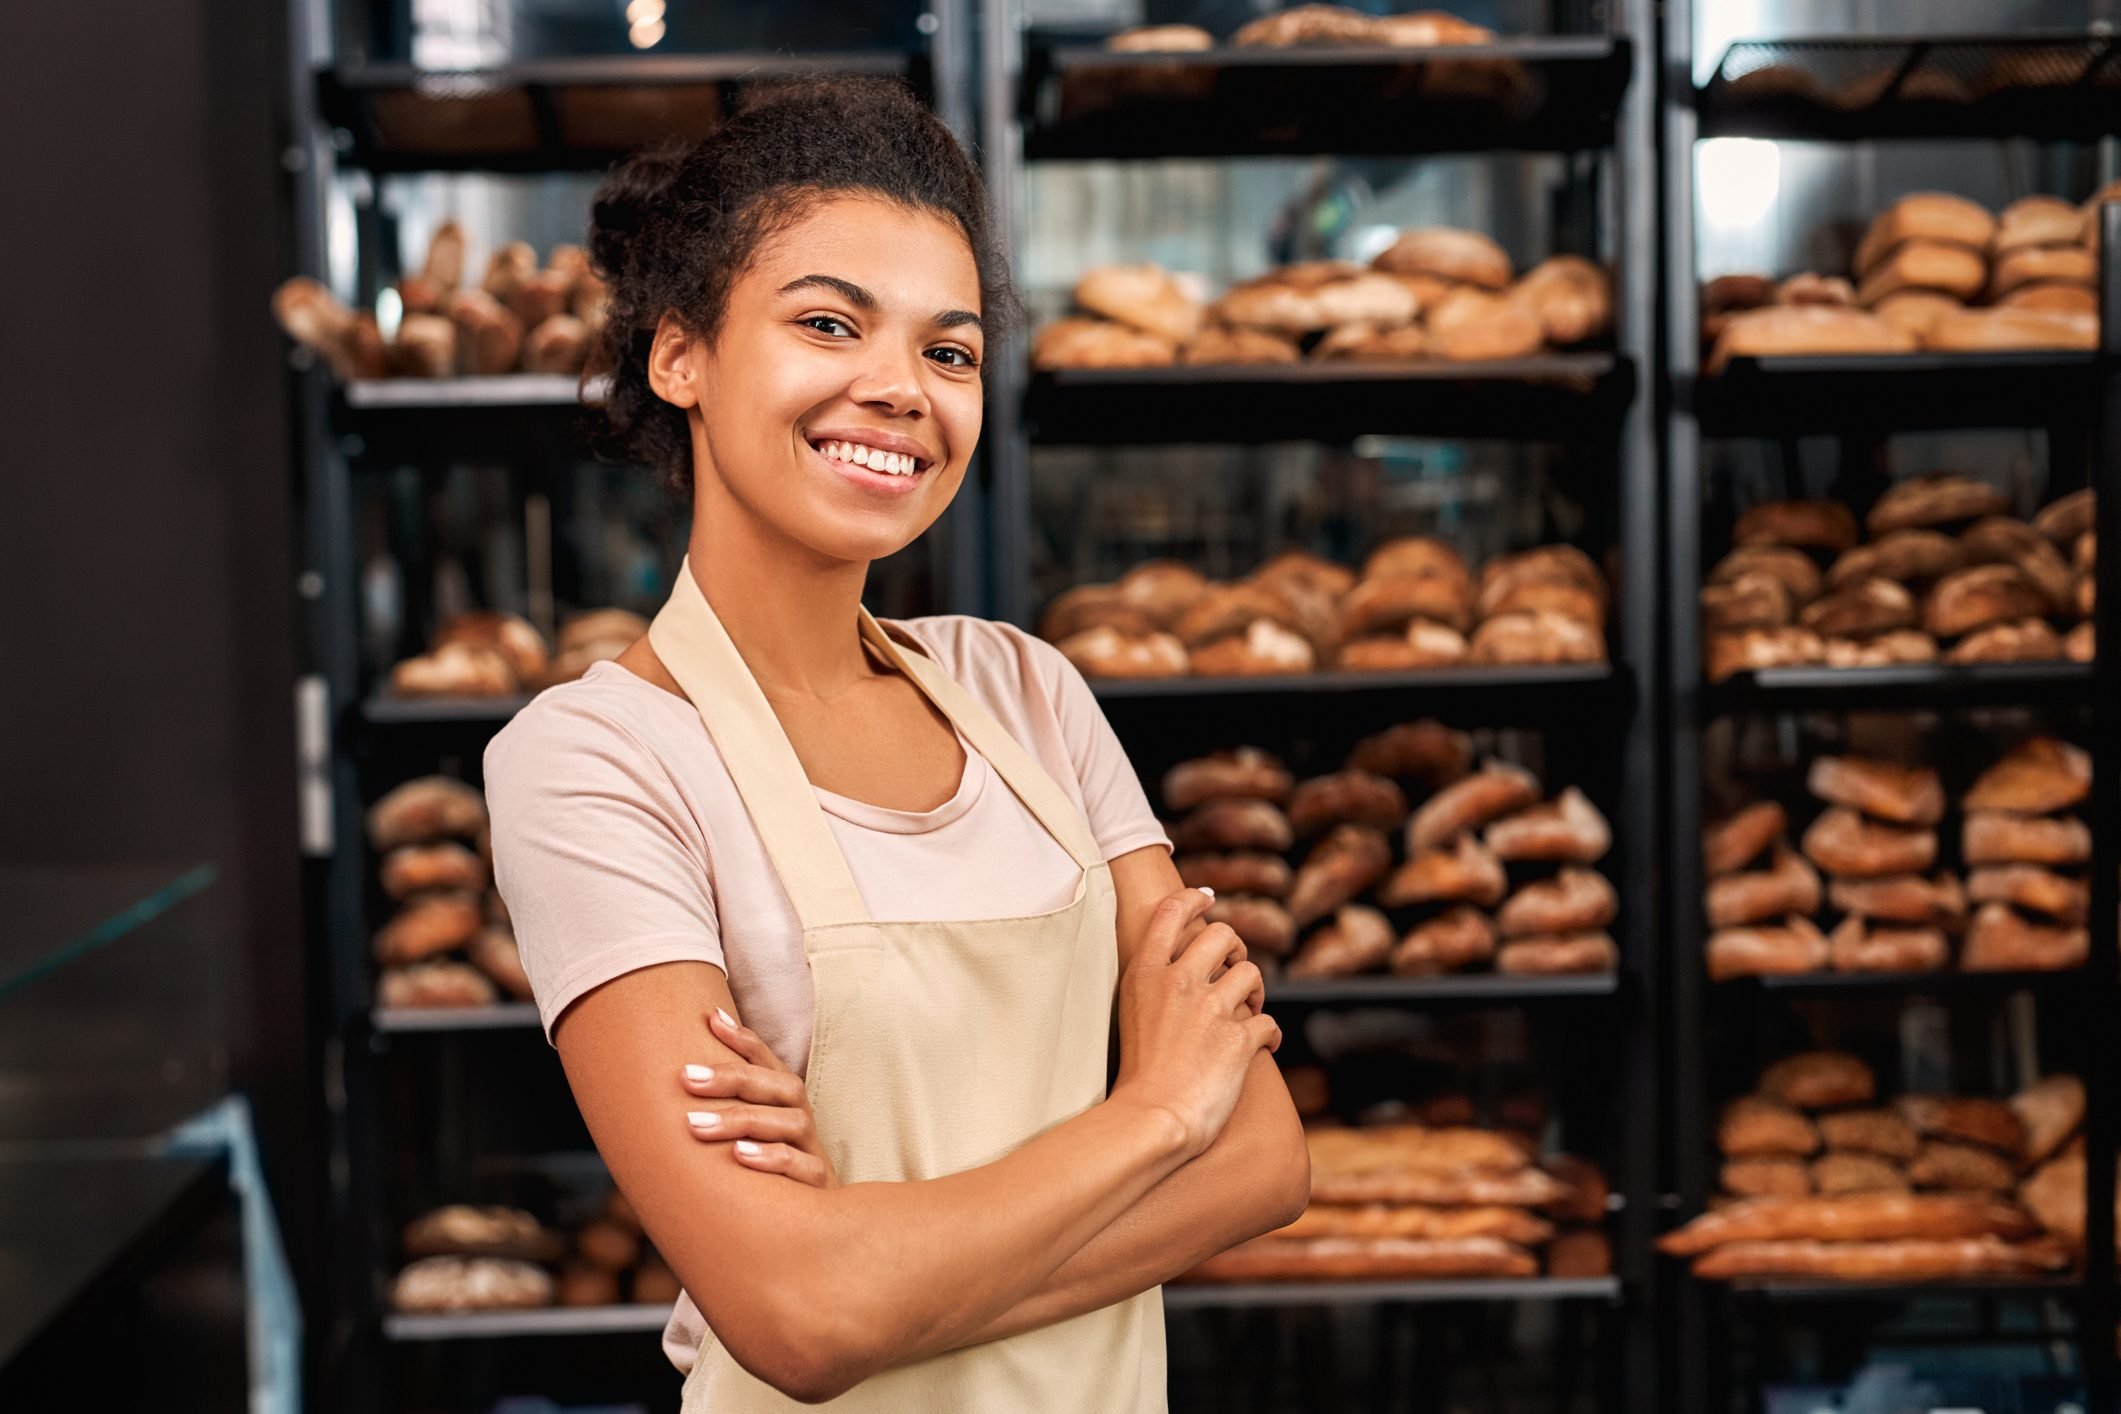 35 Small-Town Business Ideas That Every Community Needs - NerdWallet